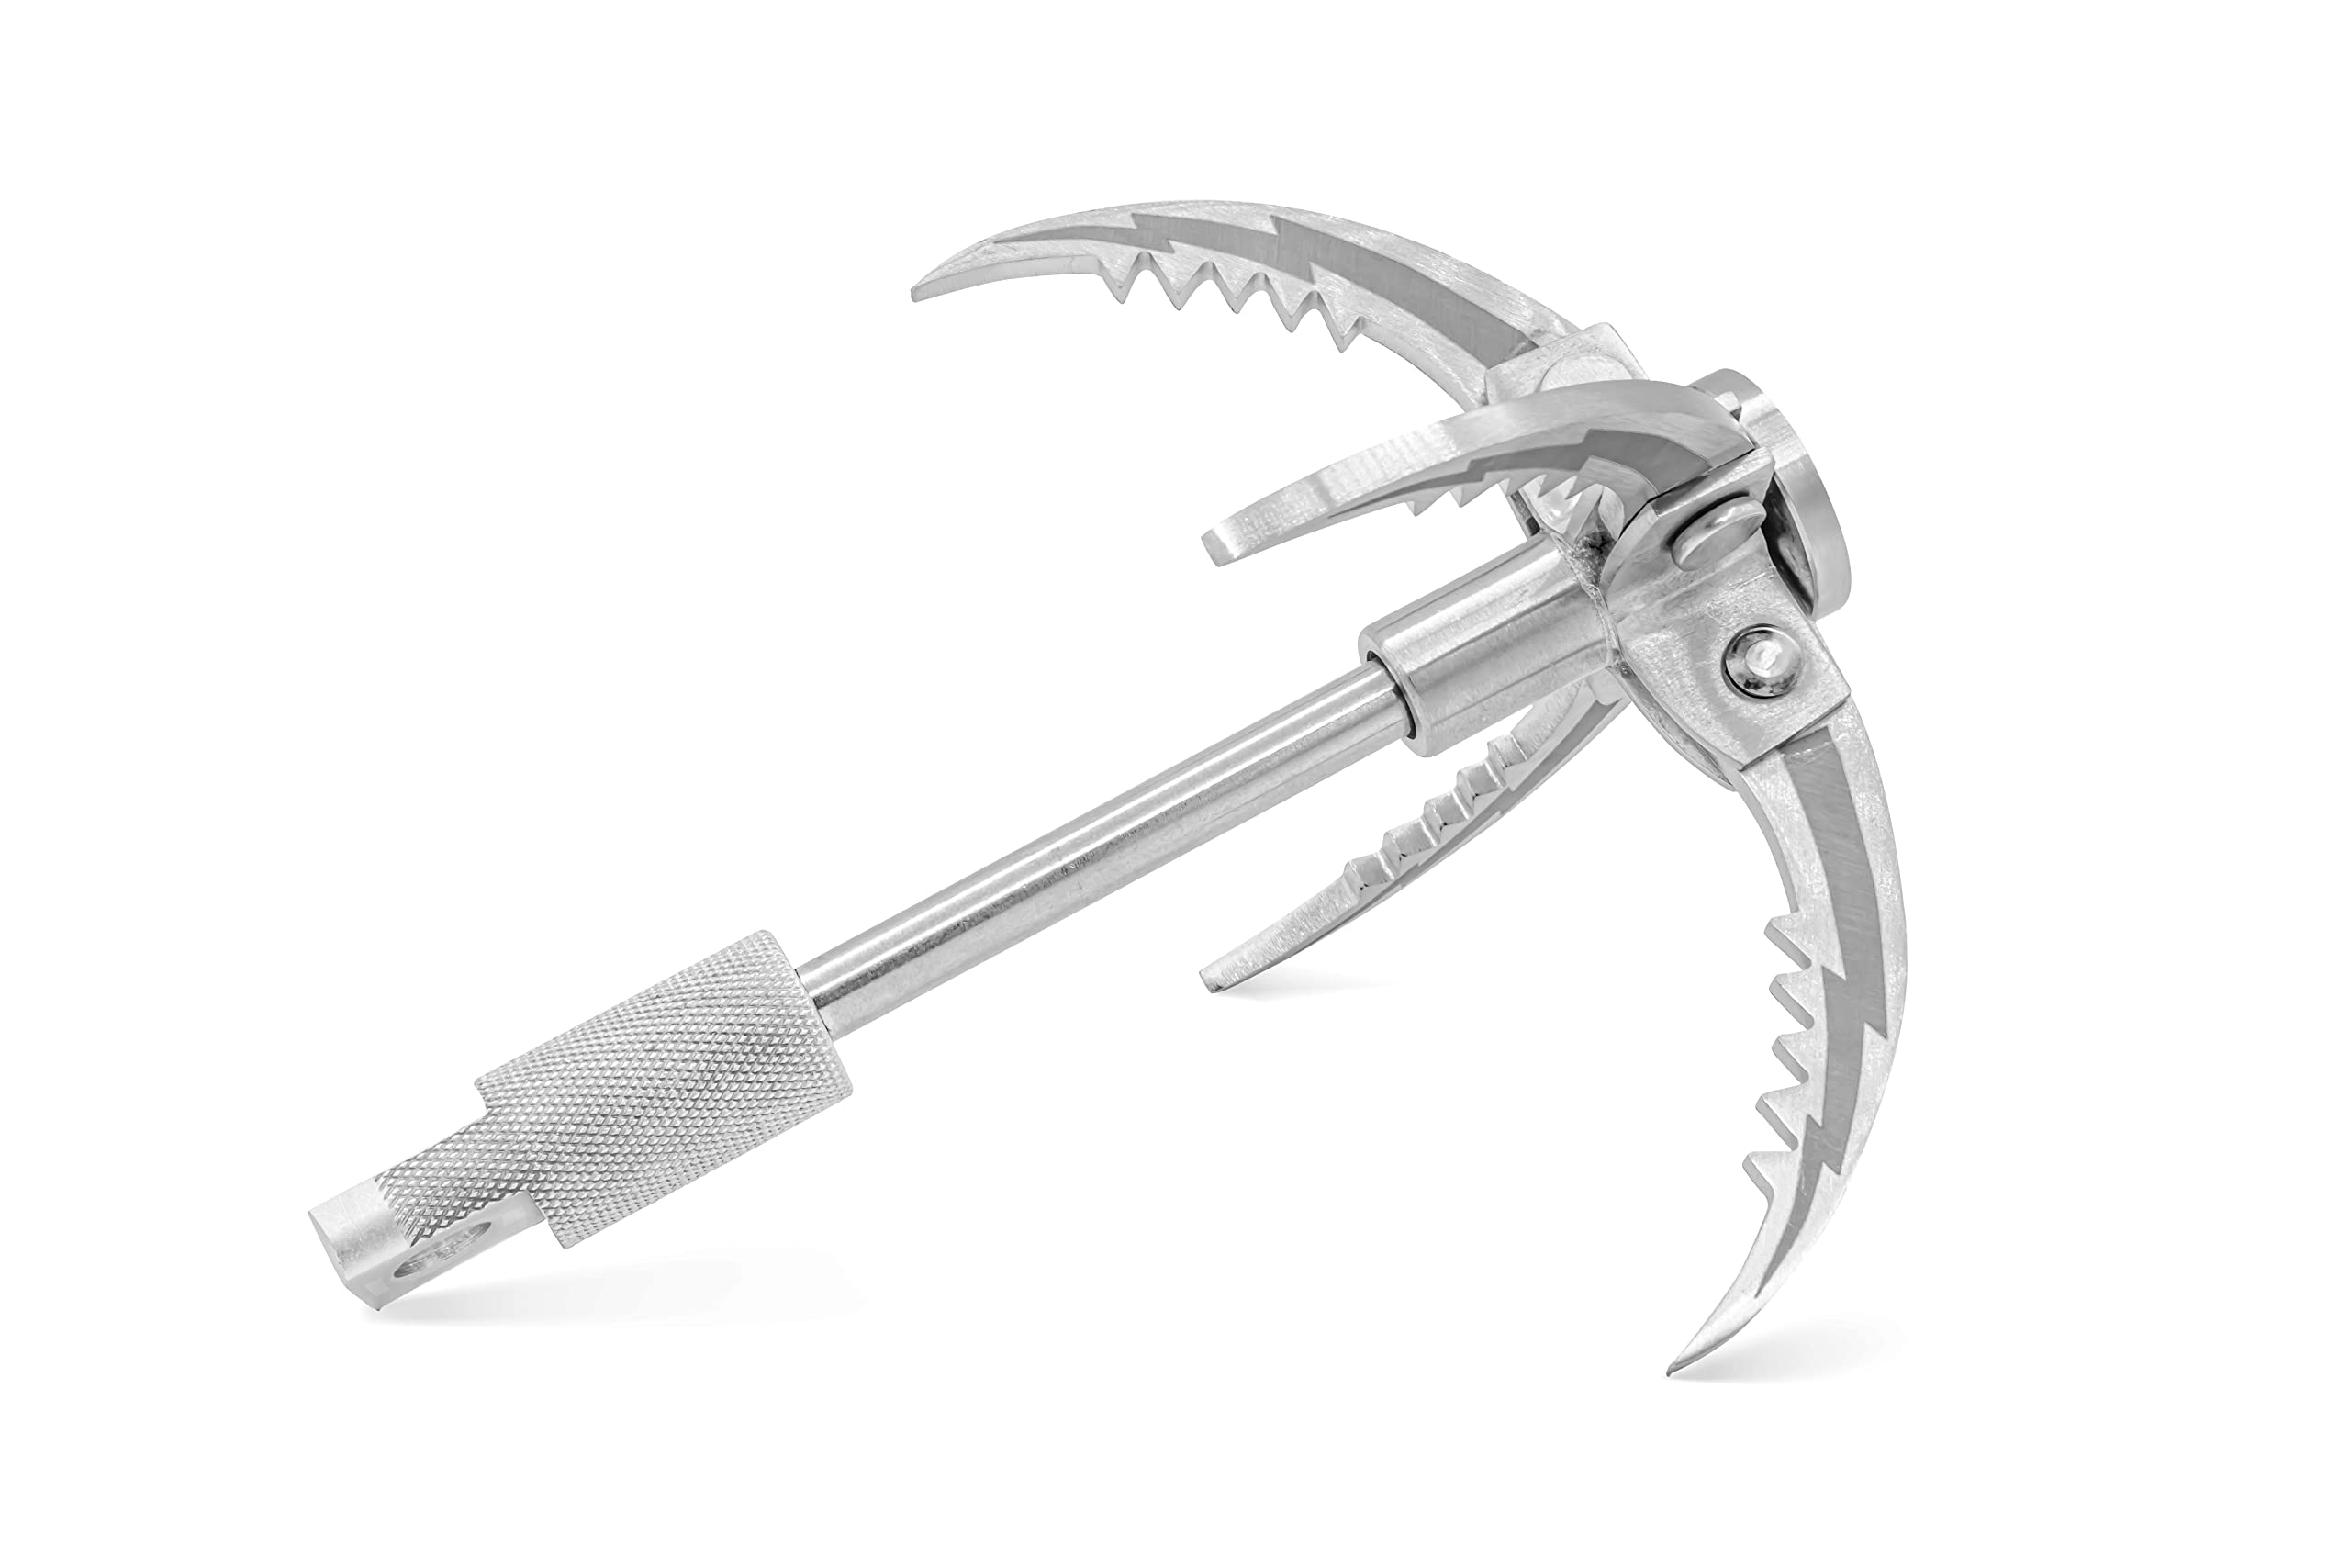 JWWYJ Folding Claw Grappling Hook - Multifunctional Stainless